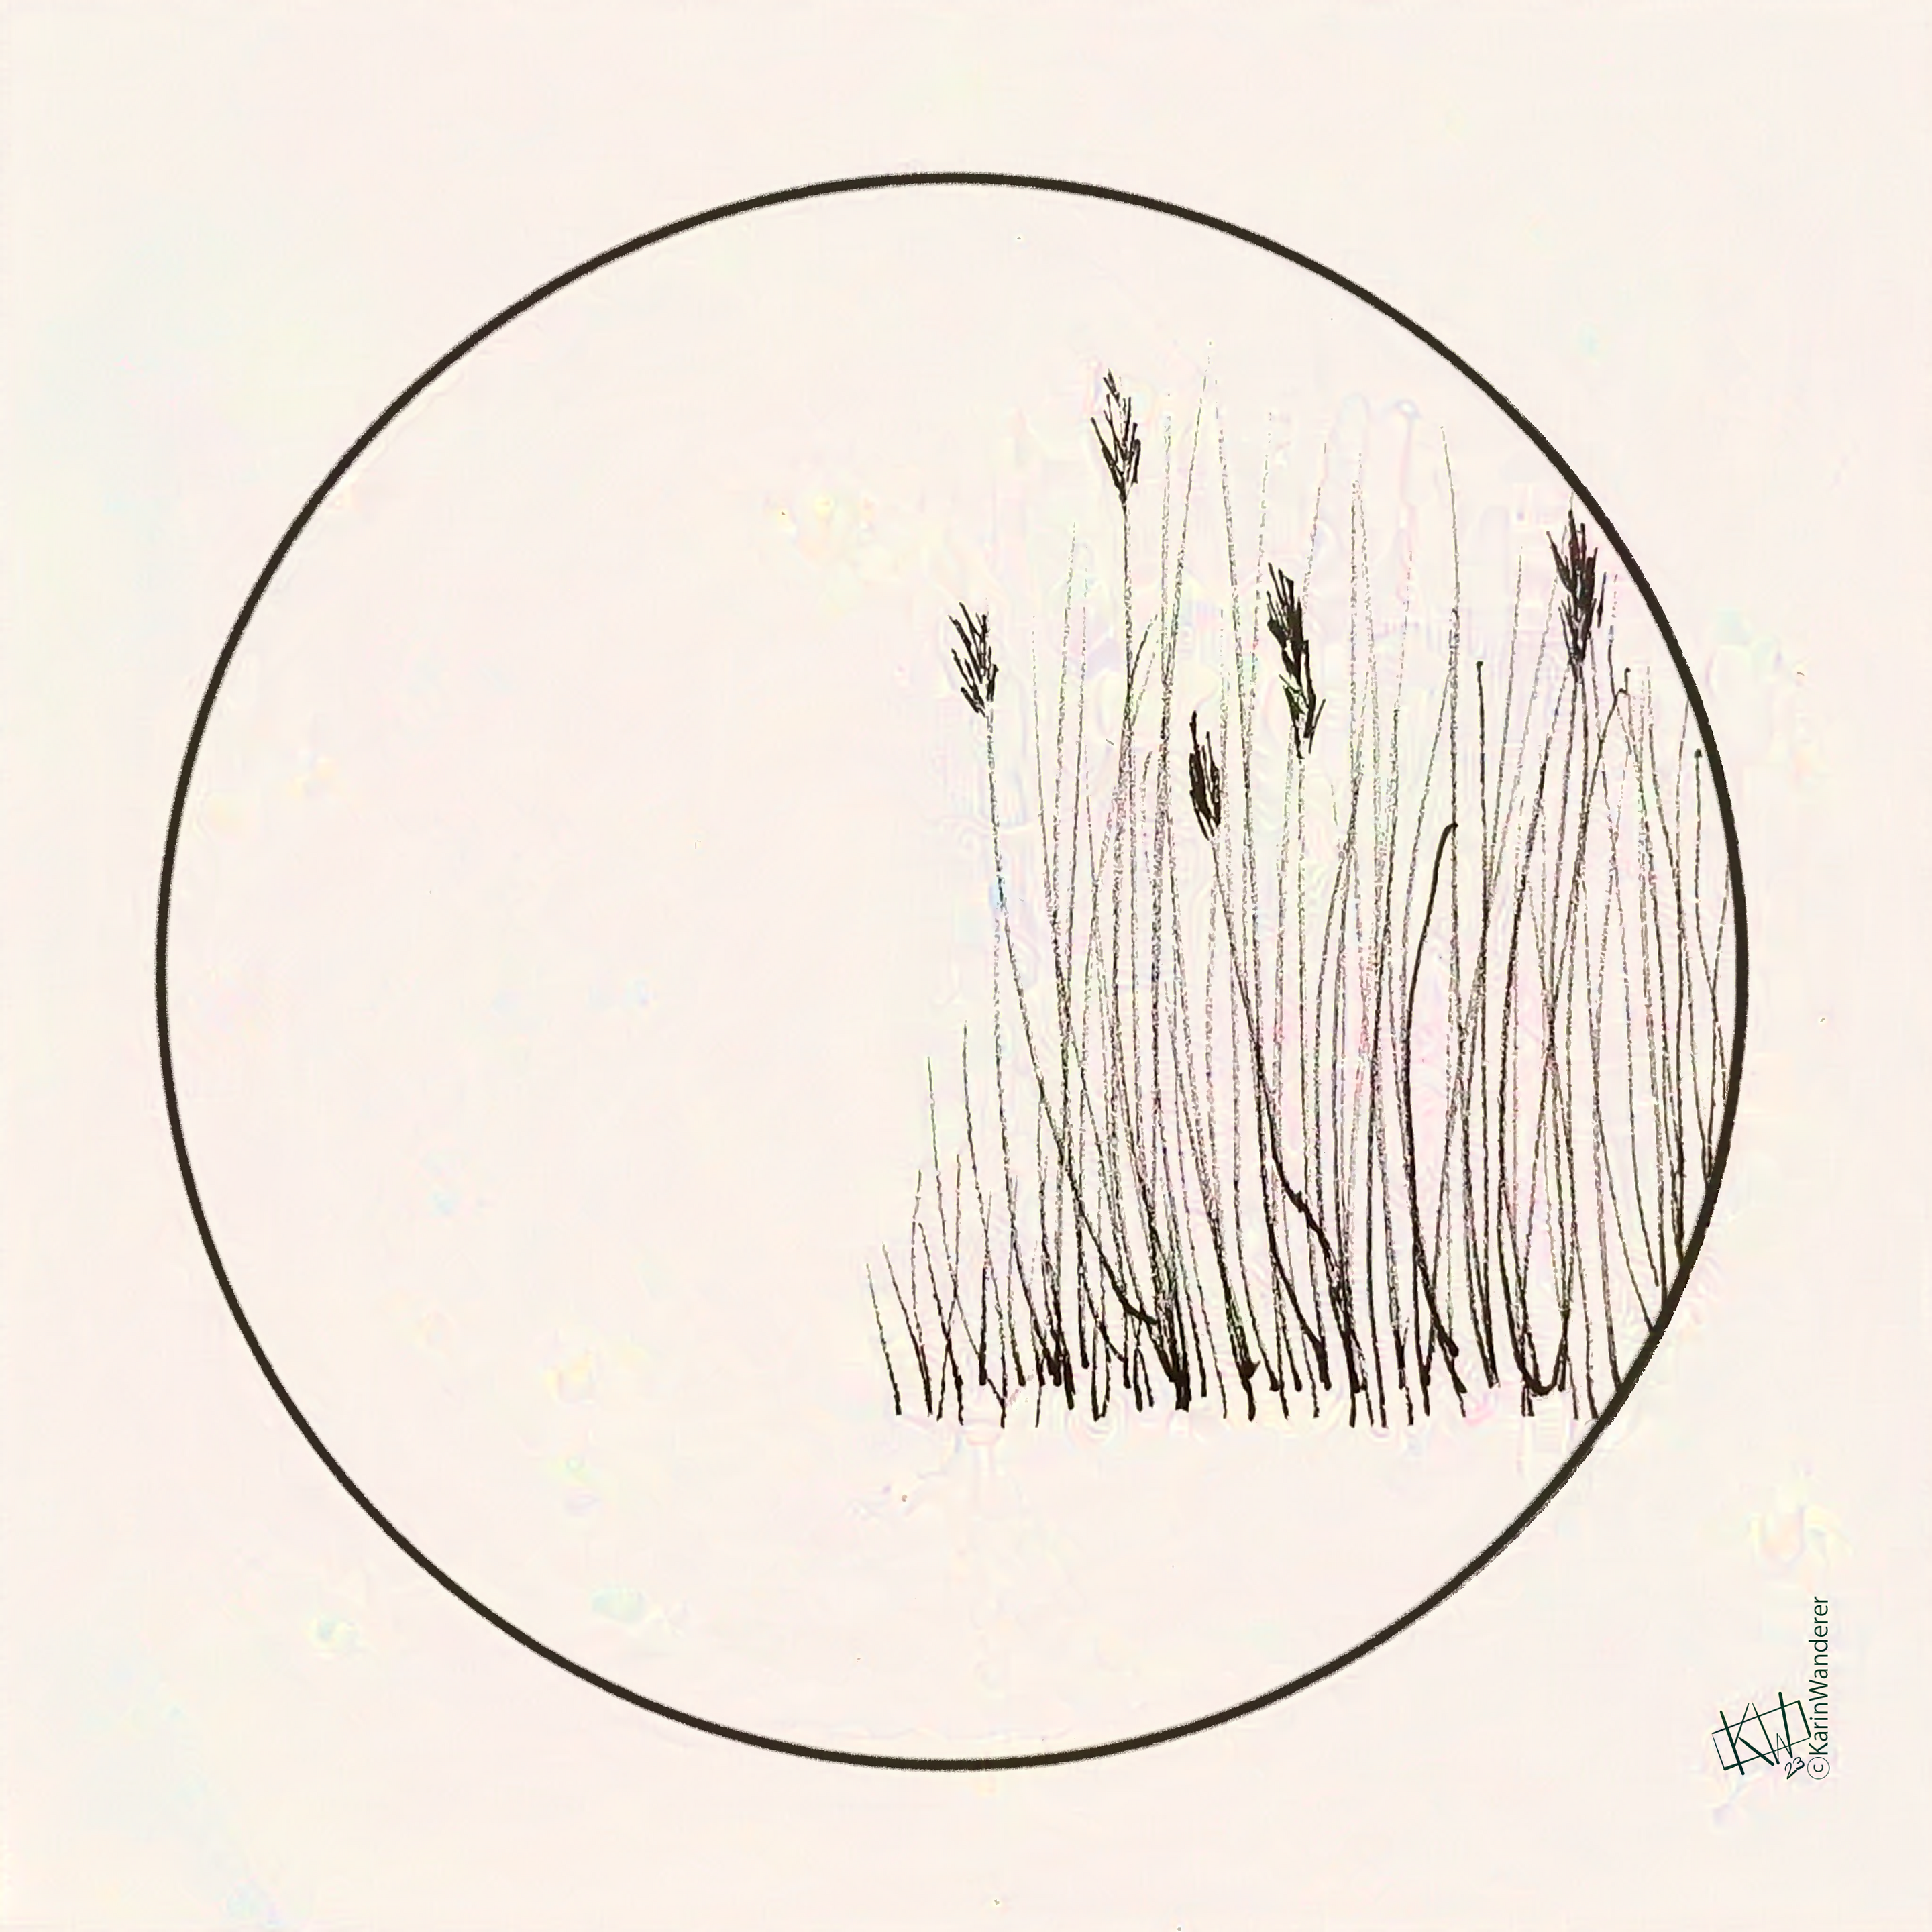 Minimalist ink drawing: a thicket of reeds growing on the bank of a river.